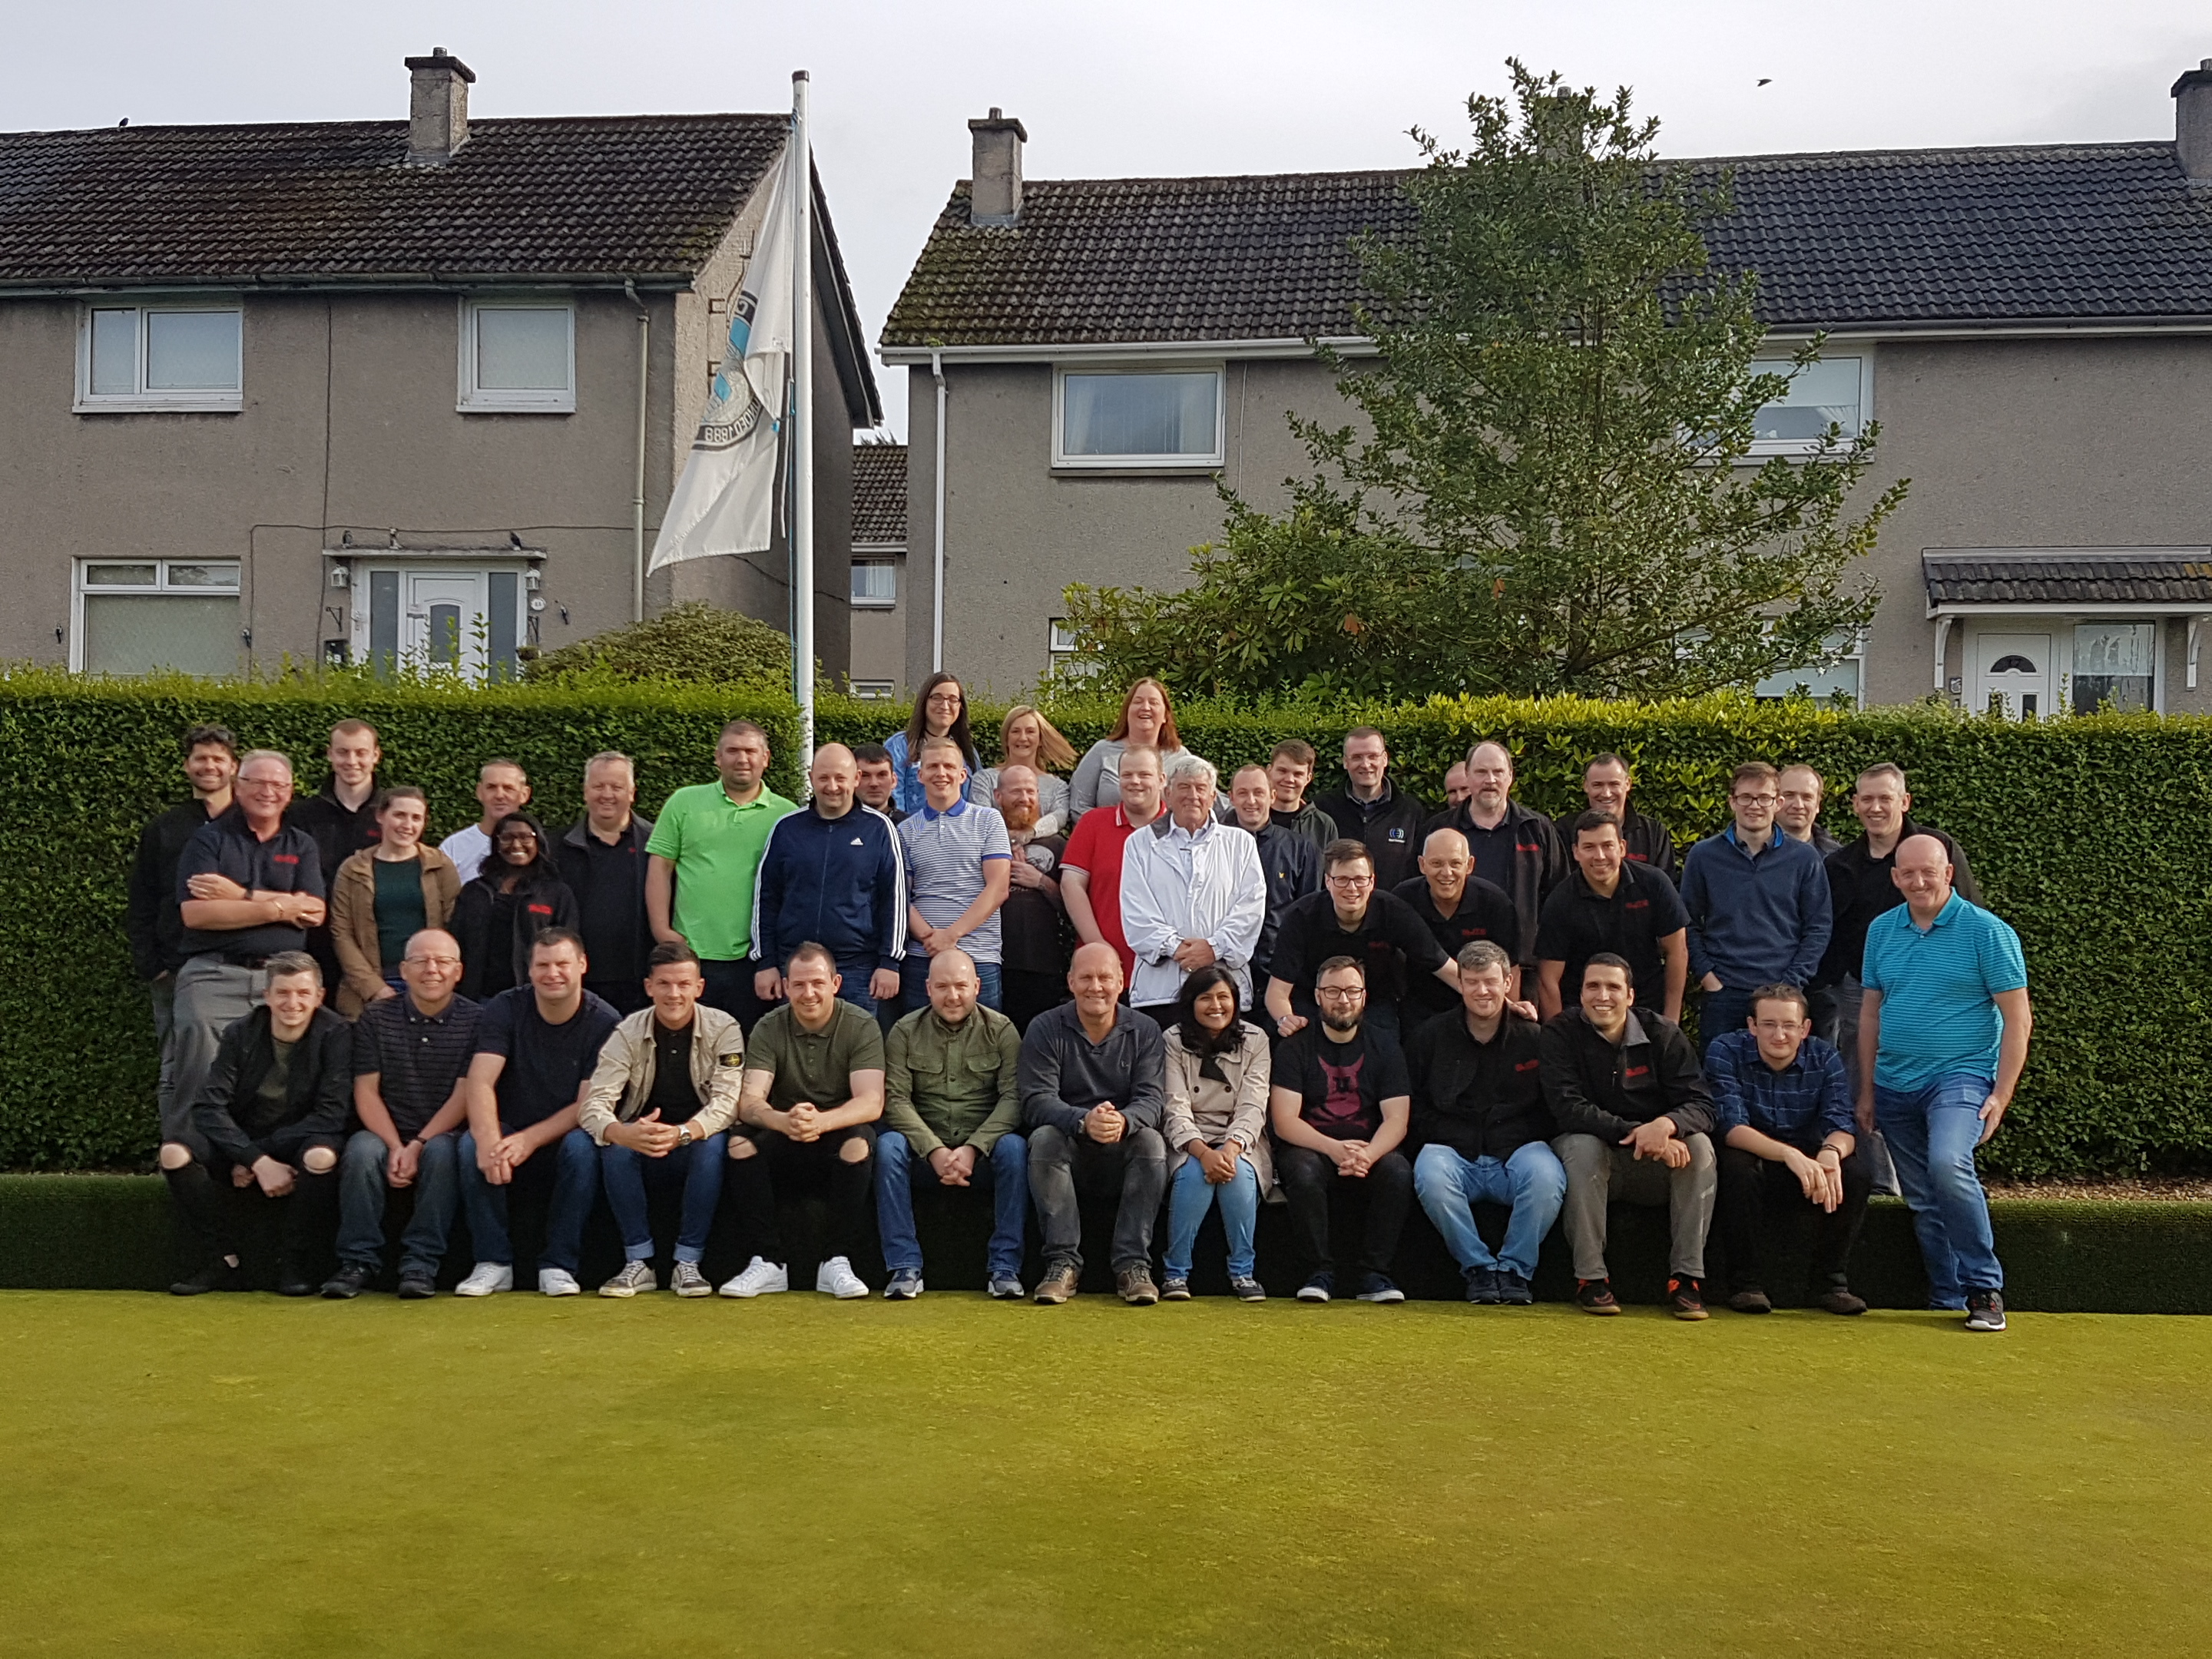 North British Distilleries and Elite Control Systems' Annual Bowl Day